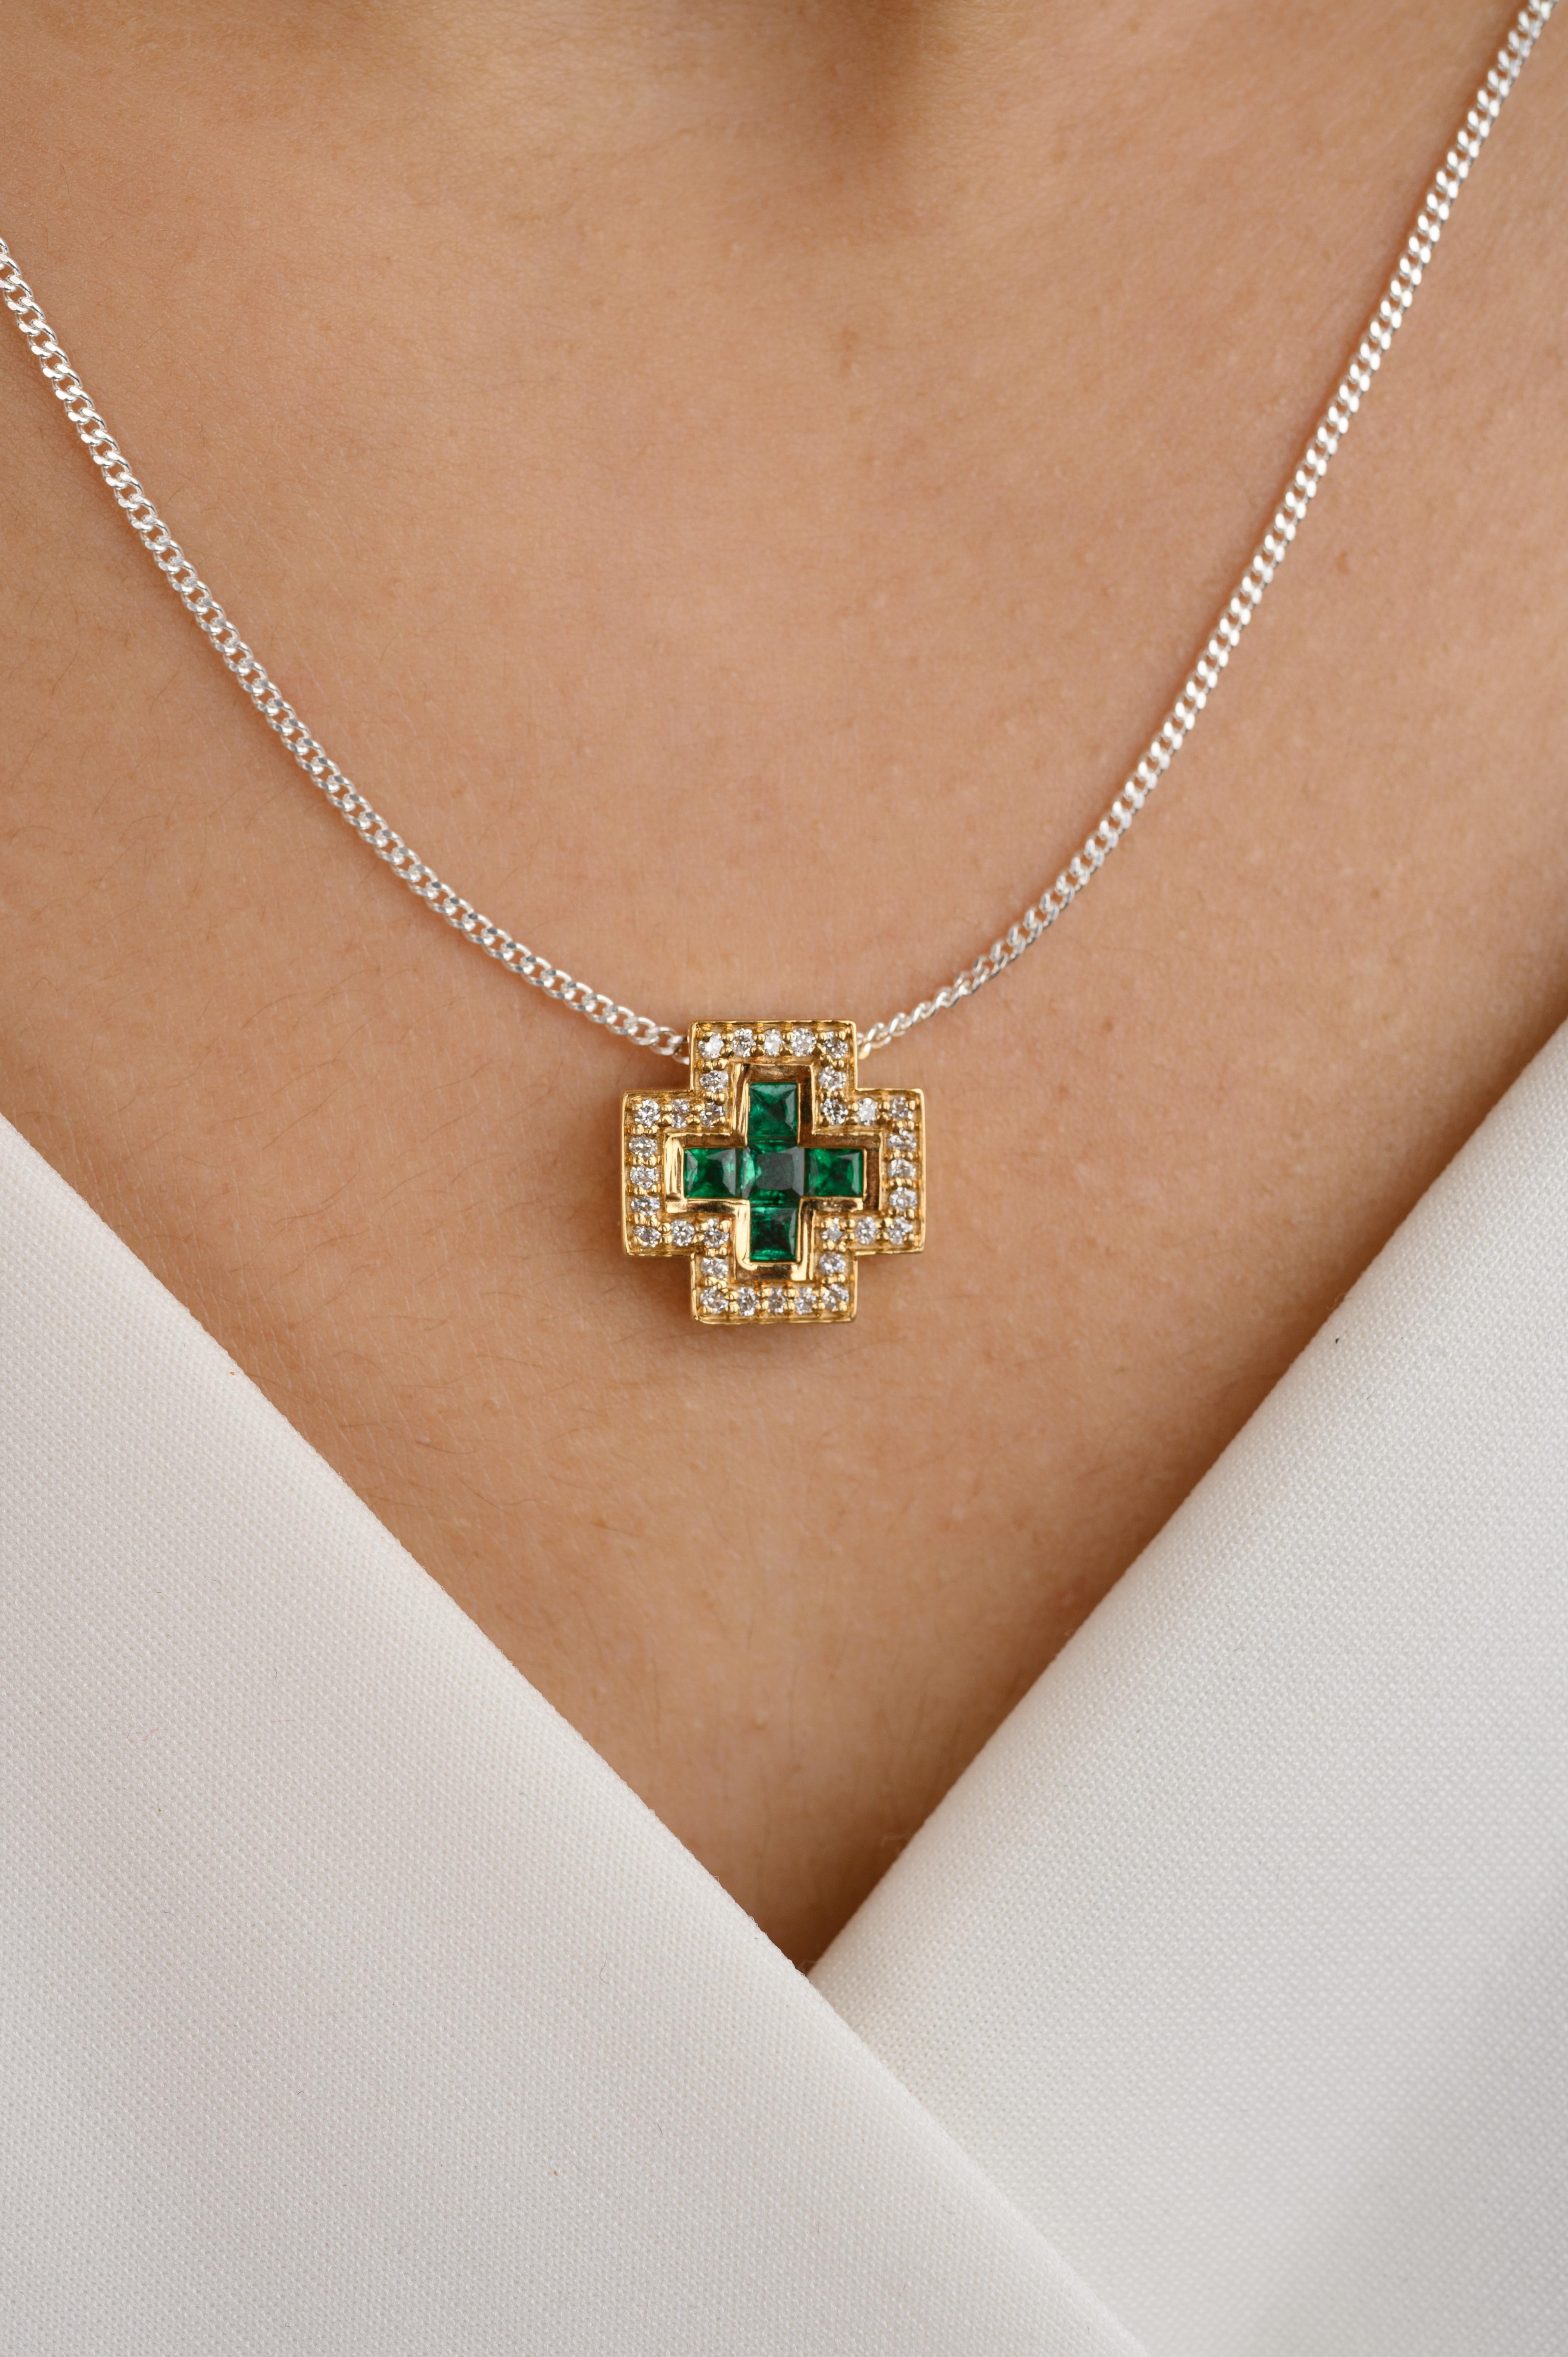 Contemporary Natural Emerald Diamond Cross Pendant in 18K Gold studded with square cut emeralds. This stunning piece of jewelry instantly elevates a casual look or dressy outfit. 
Emerald enhances the intellectual capacity of the person.
Designed